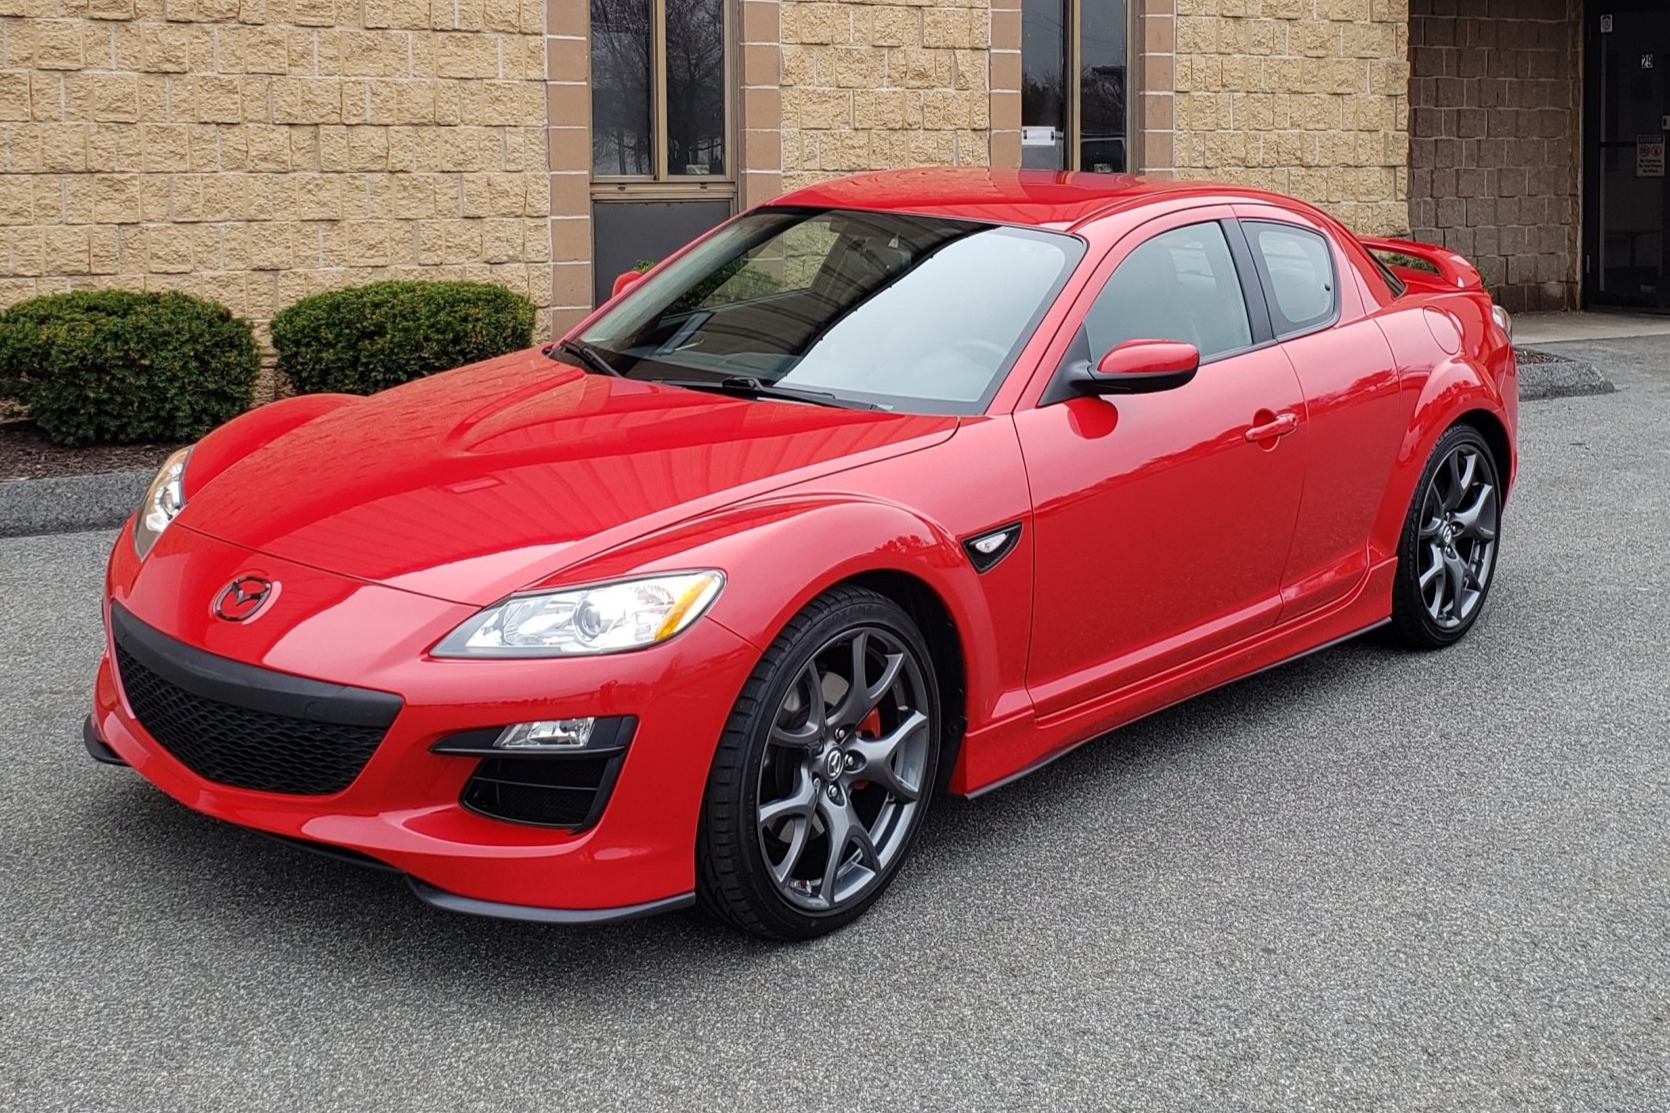 27k-Mile 2011 Mazda RX-8 R3 6-Speed for sale on BaT Auctions - sold for  $18,750 on May 24, 2021 (Lot #48,430) | Bring a Trailer